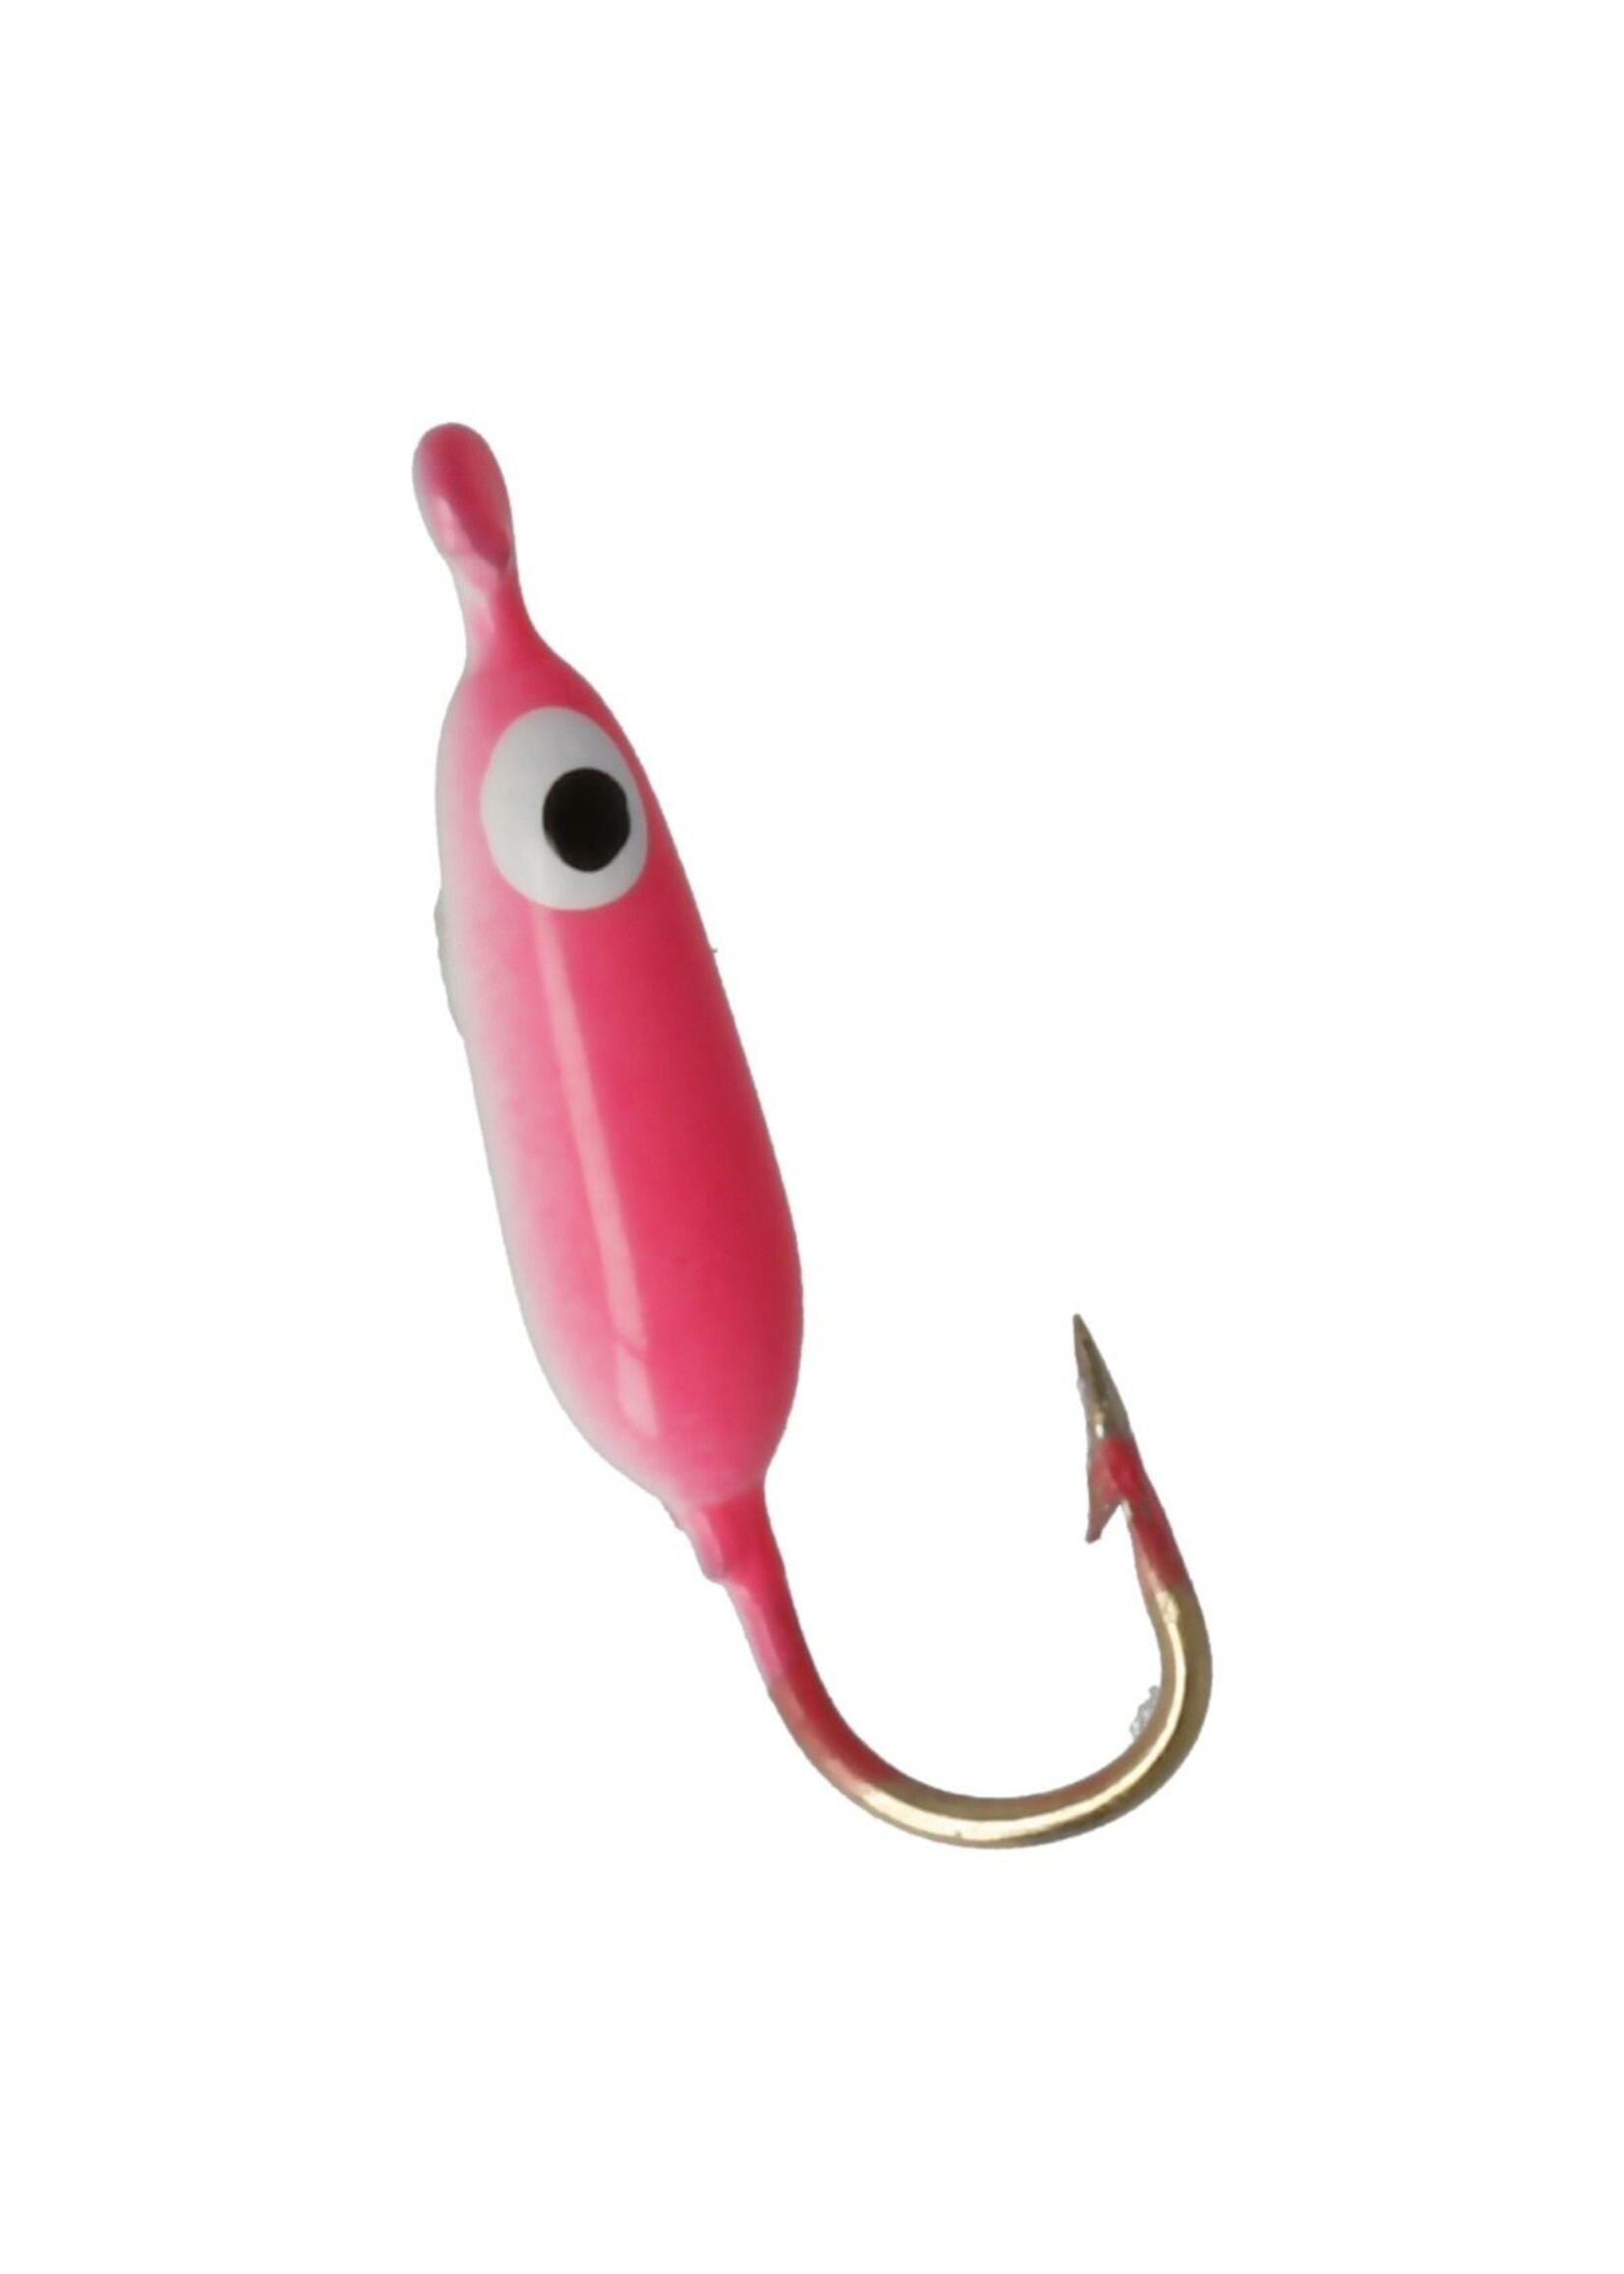 Eagle Claw Eagle Claw Ice Fishing Kit with Tin Jigs